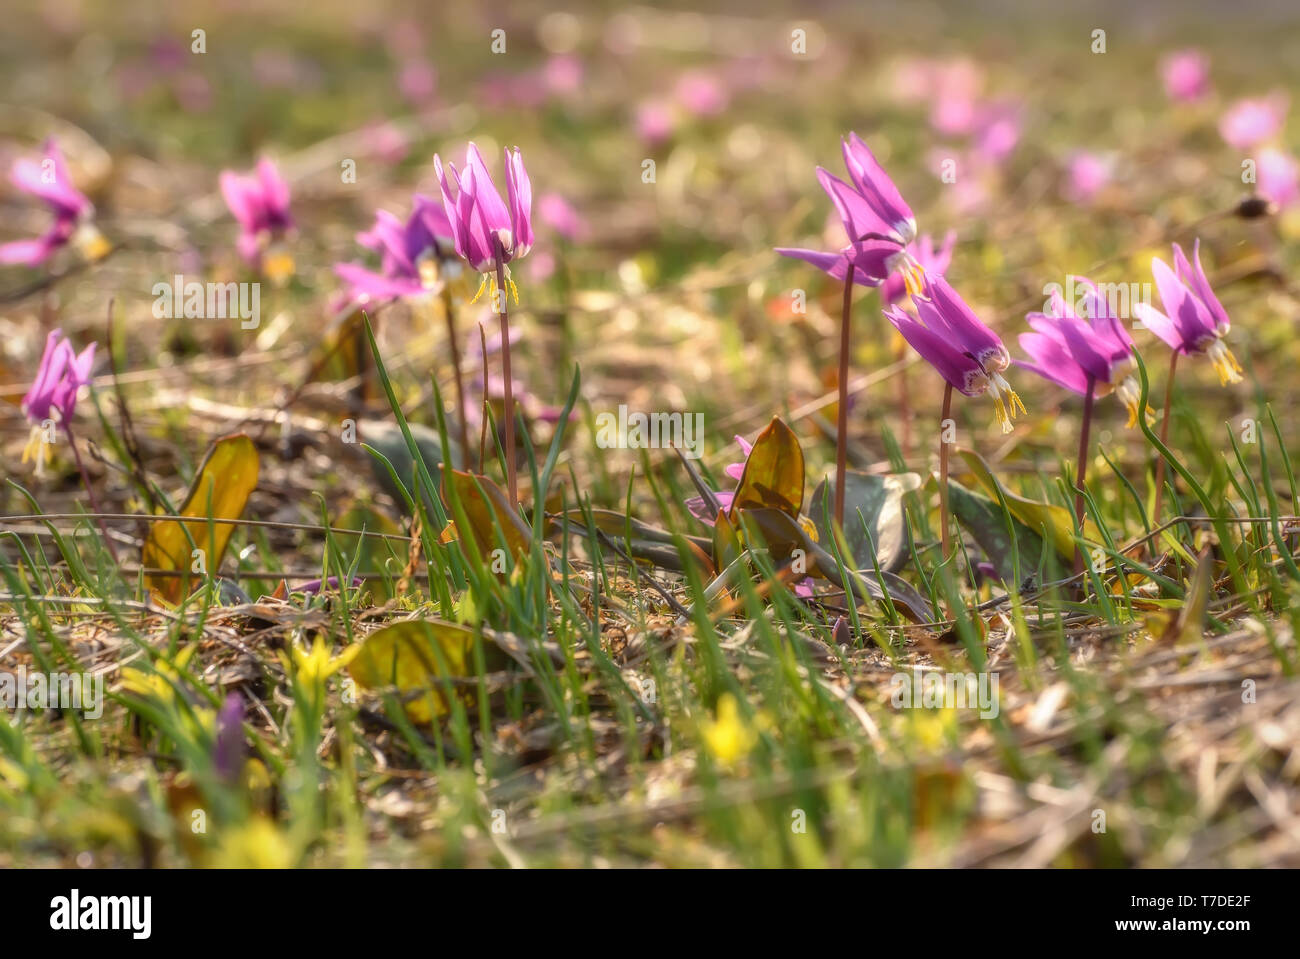 Amazing floral background with first spring pink wildflowers of Erythronium sibiricum in a meadow close up Stock Photo